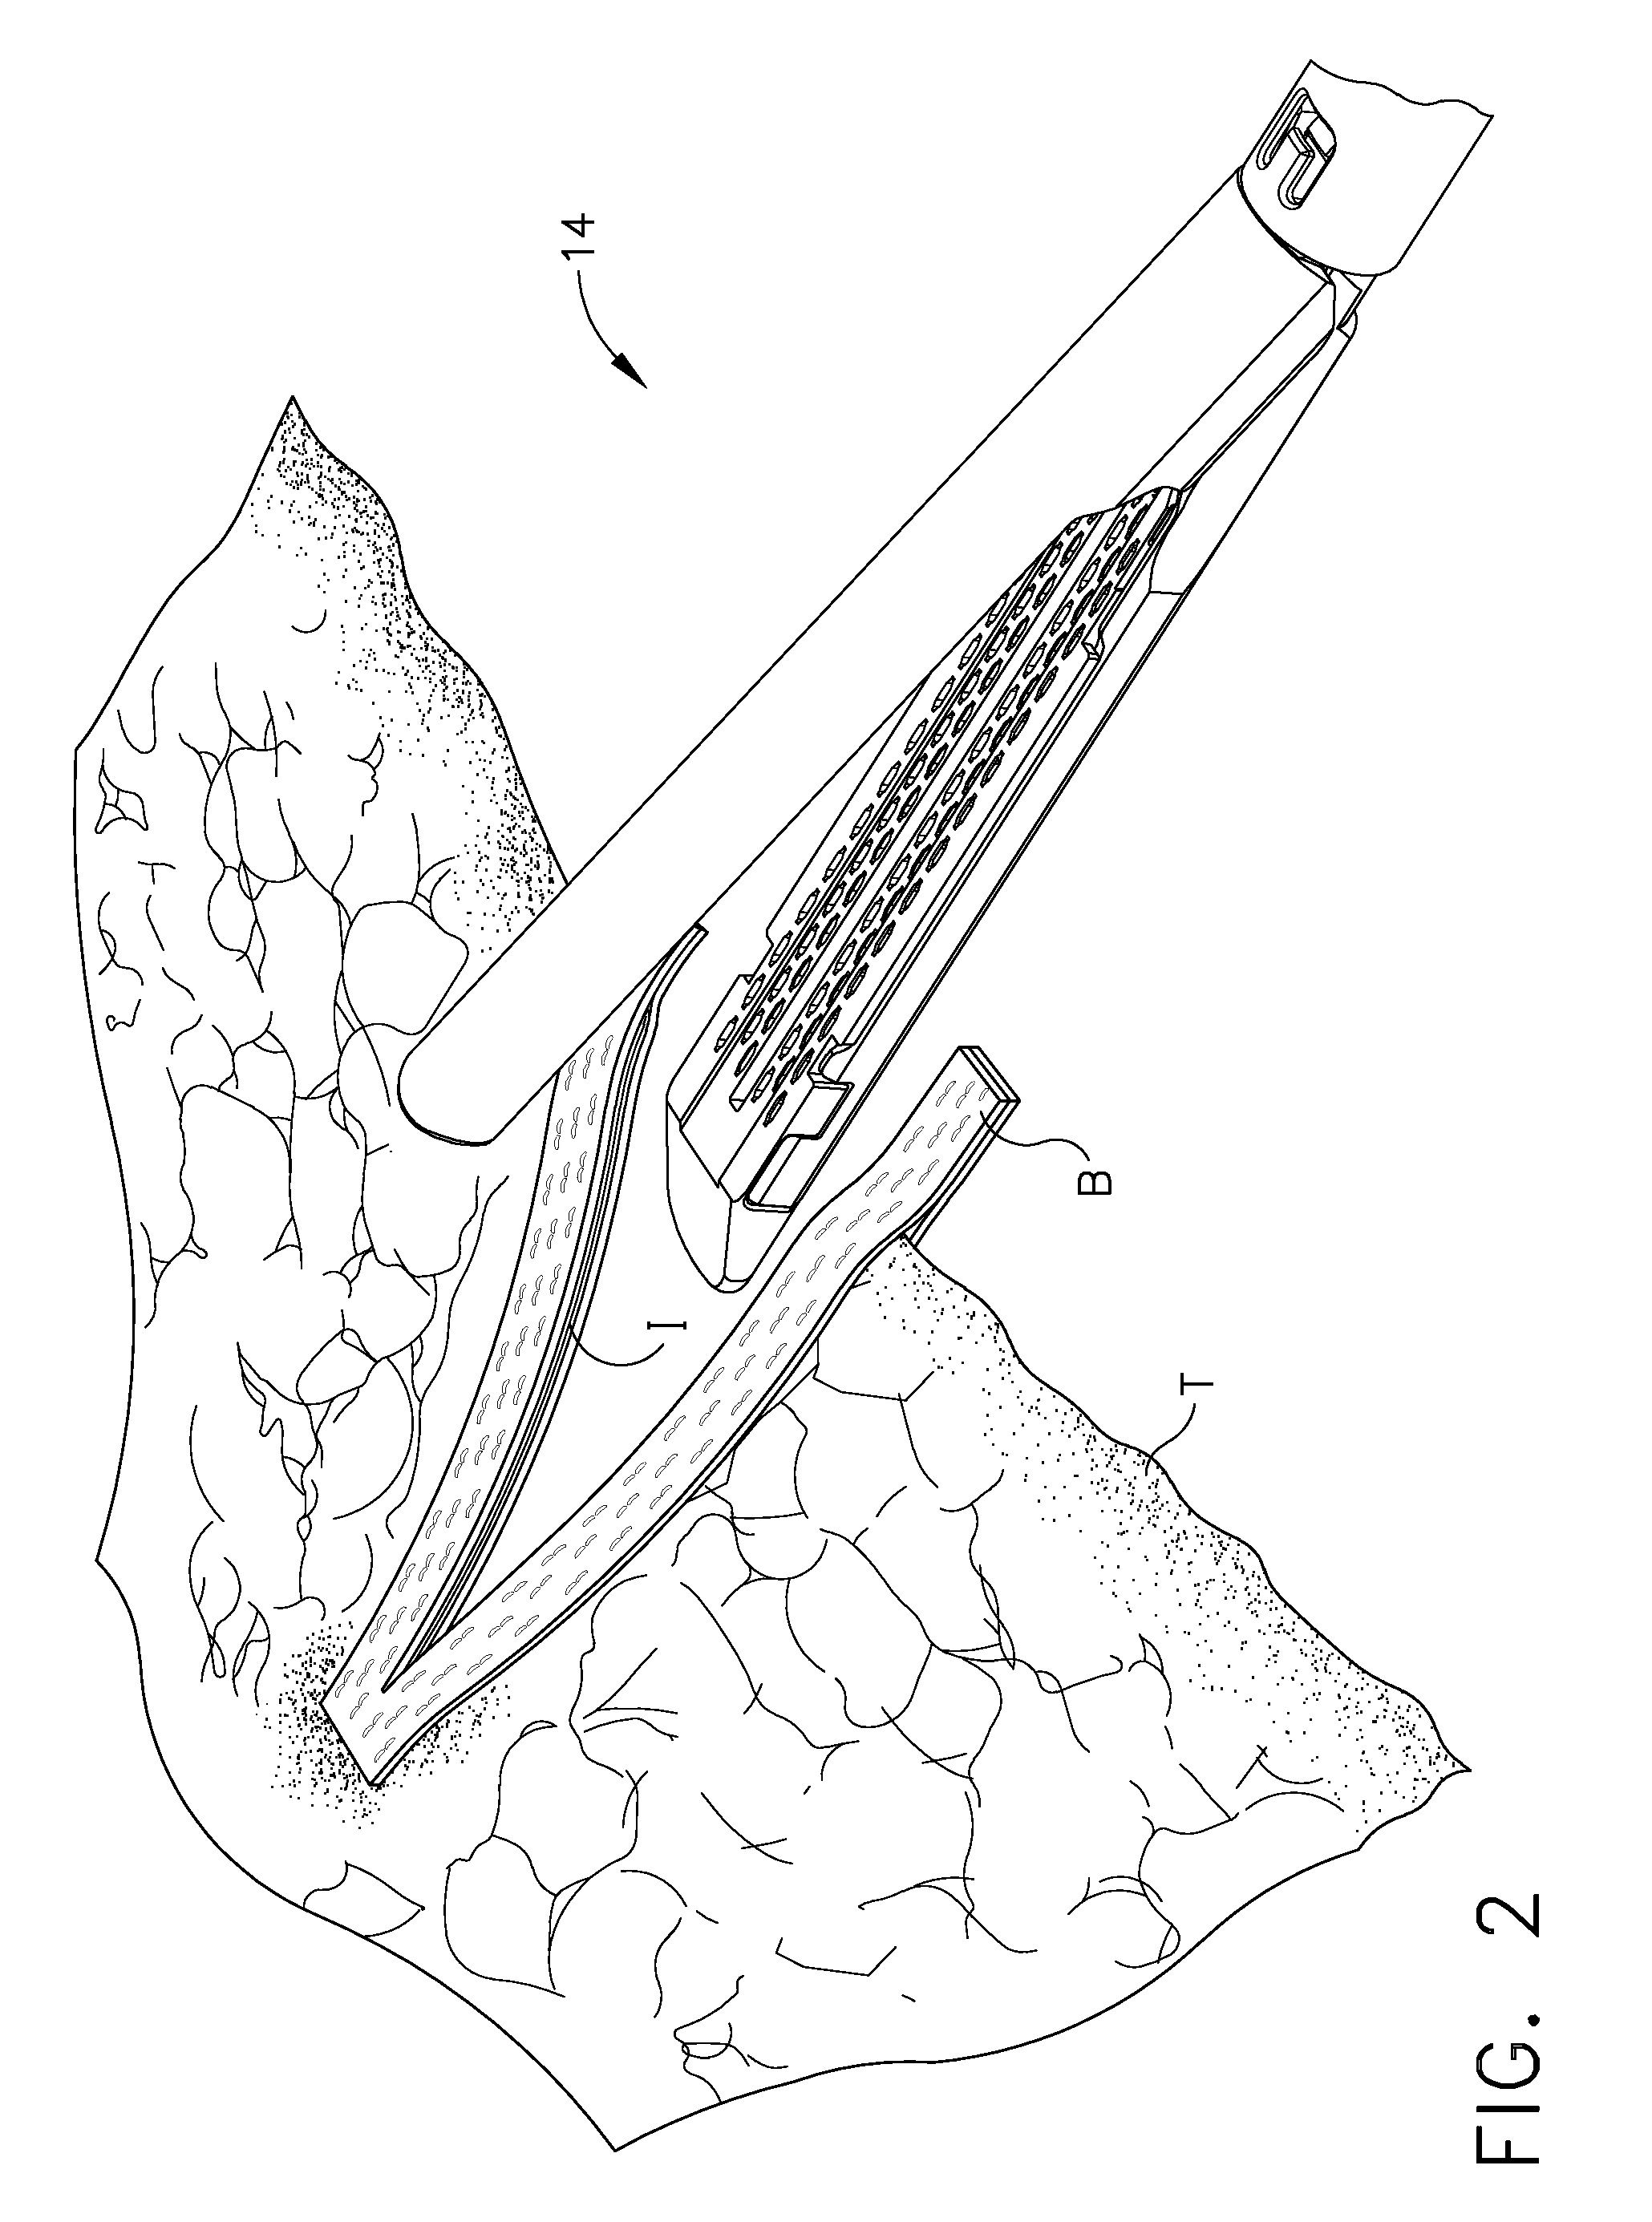 Packaging for attaching buttress material to a surgical stapling instrument